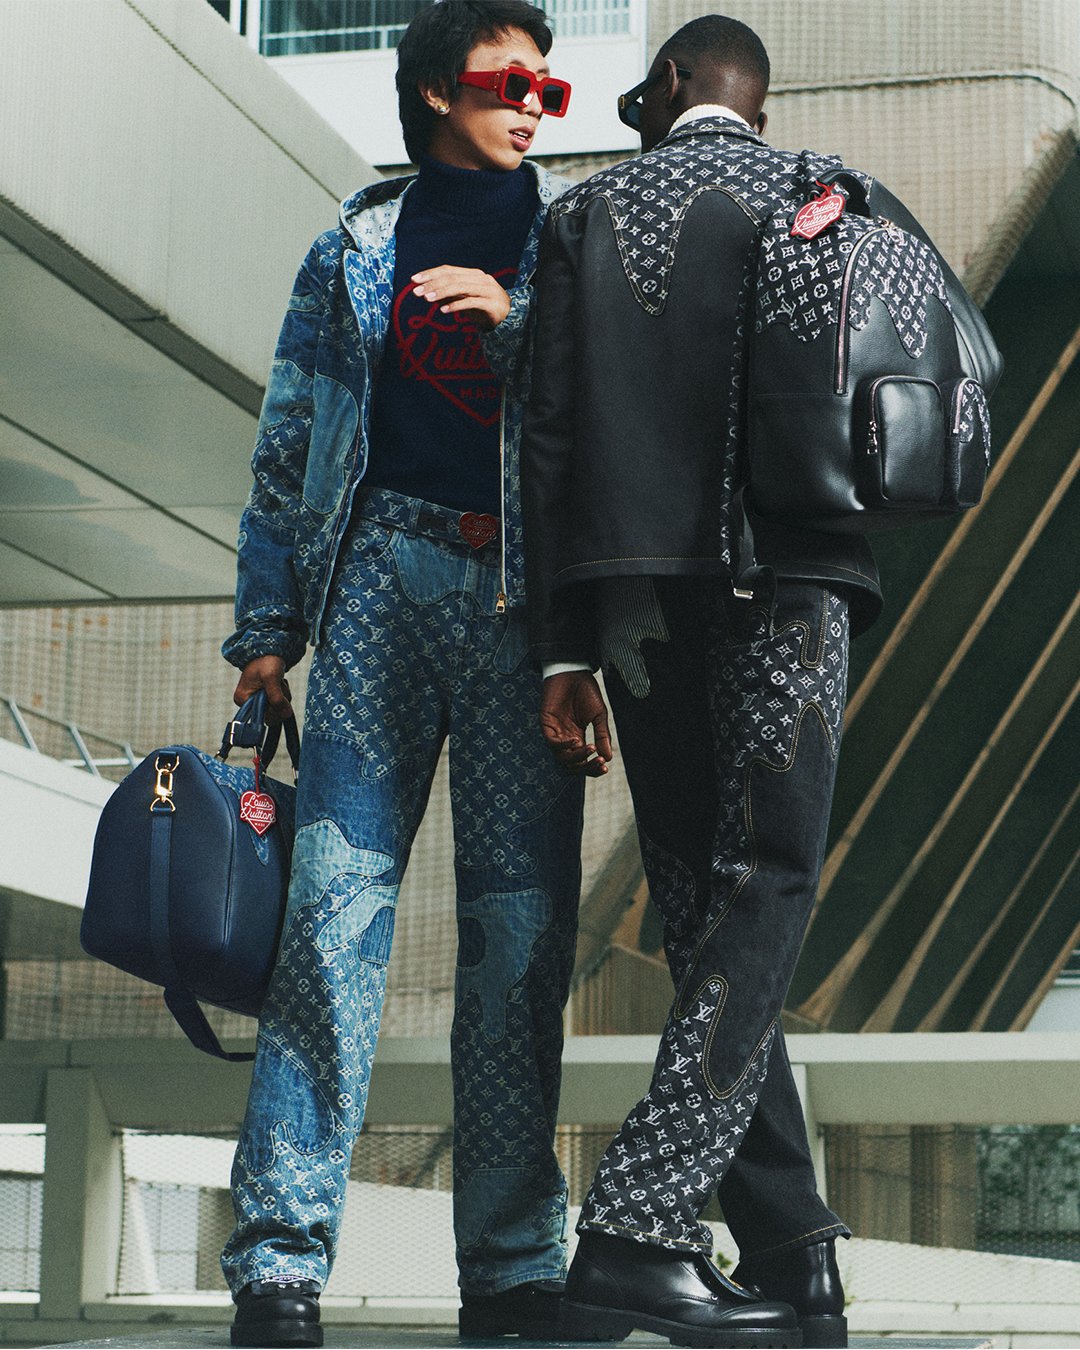 X 上的Louis Vuitton：「Fusing influences. New #LVxNIGO pieces combine elements  from @VirgilAbloh, #LouisVuitton and #NIGO's worlds in the Monogram Drip  line of ready-to-wear and accessories. Explore the latest drop from this  year's